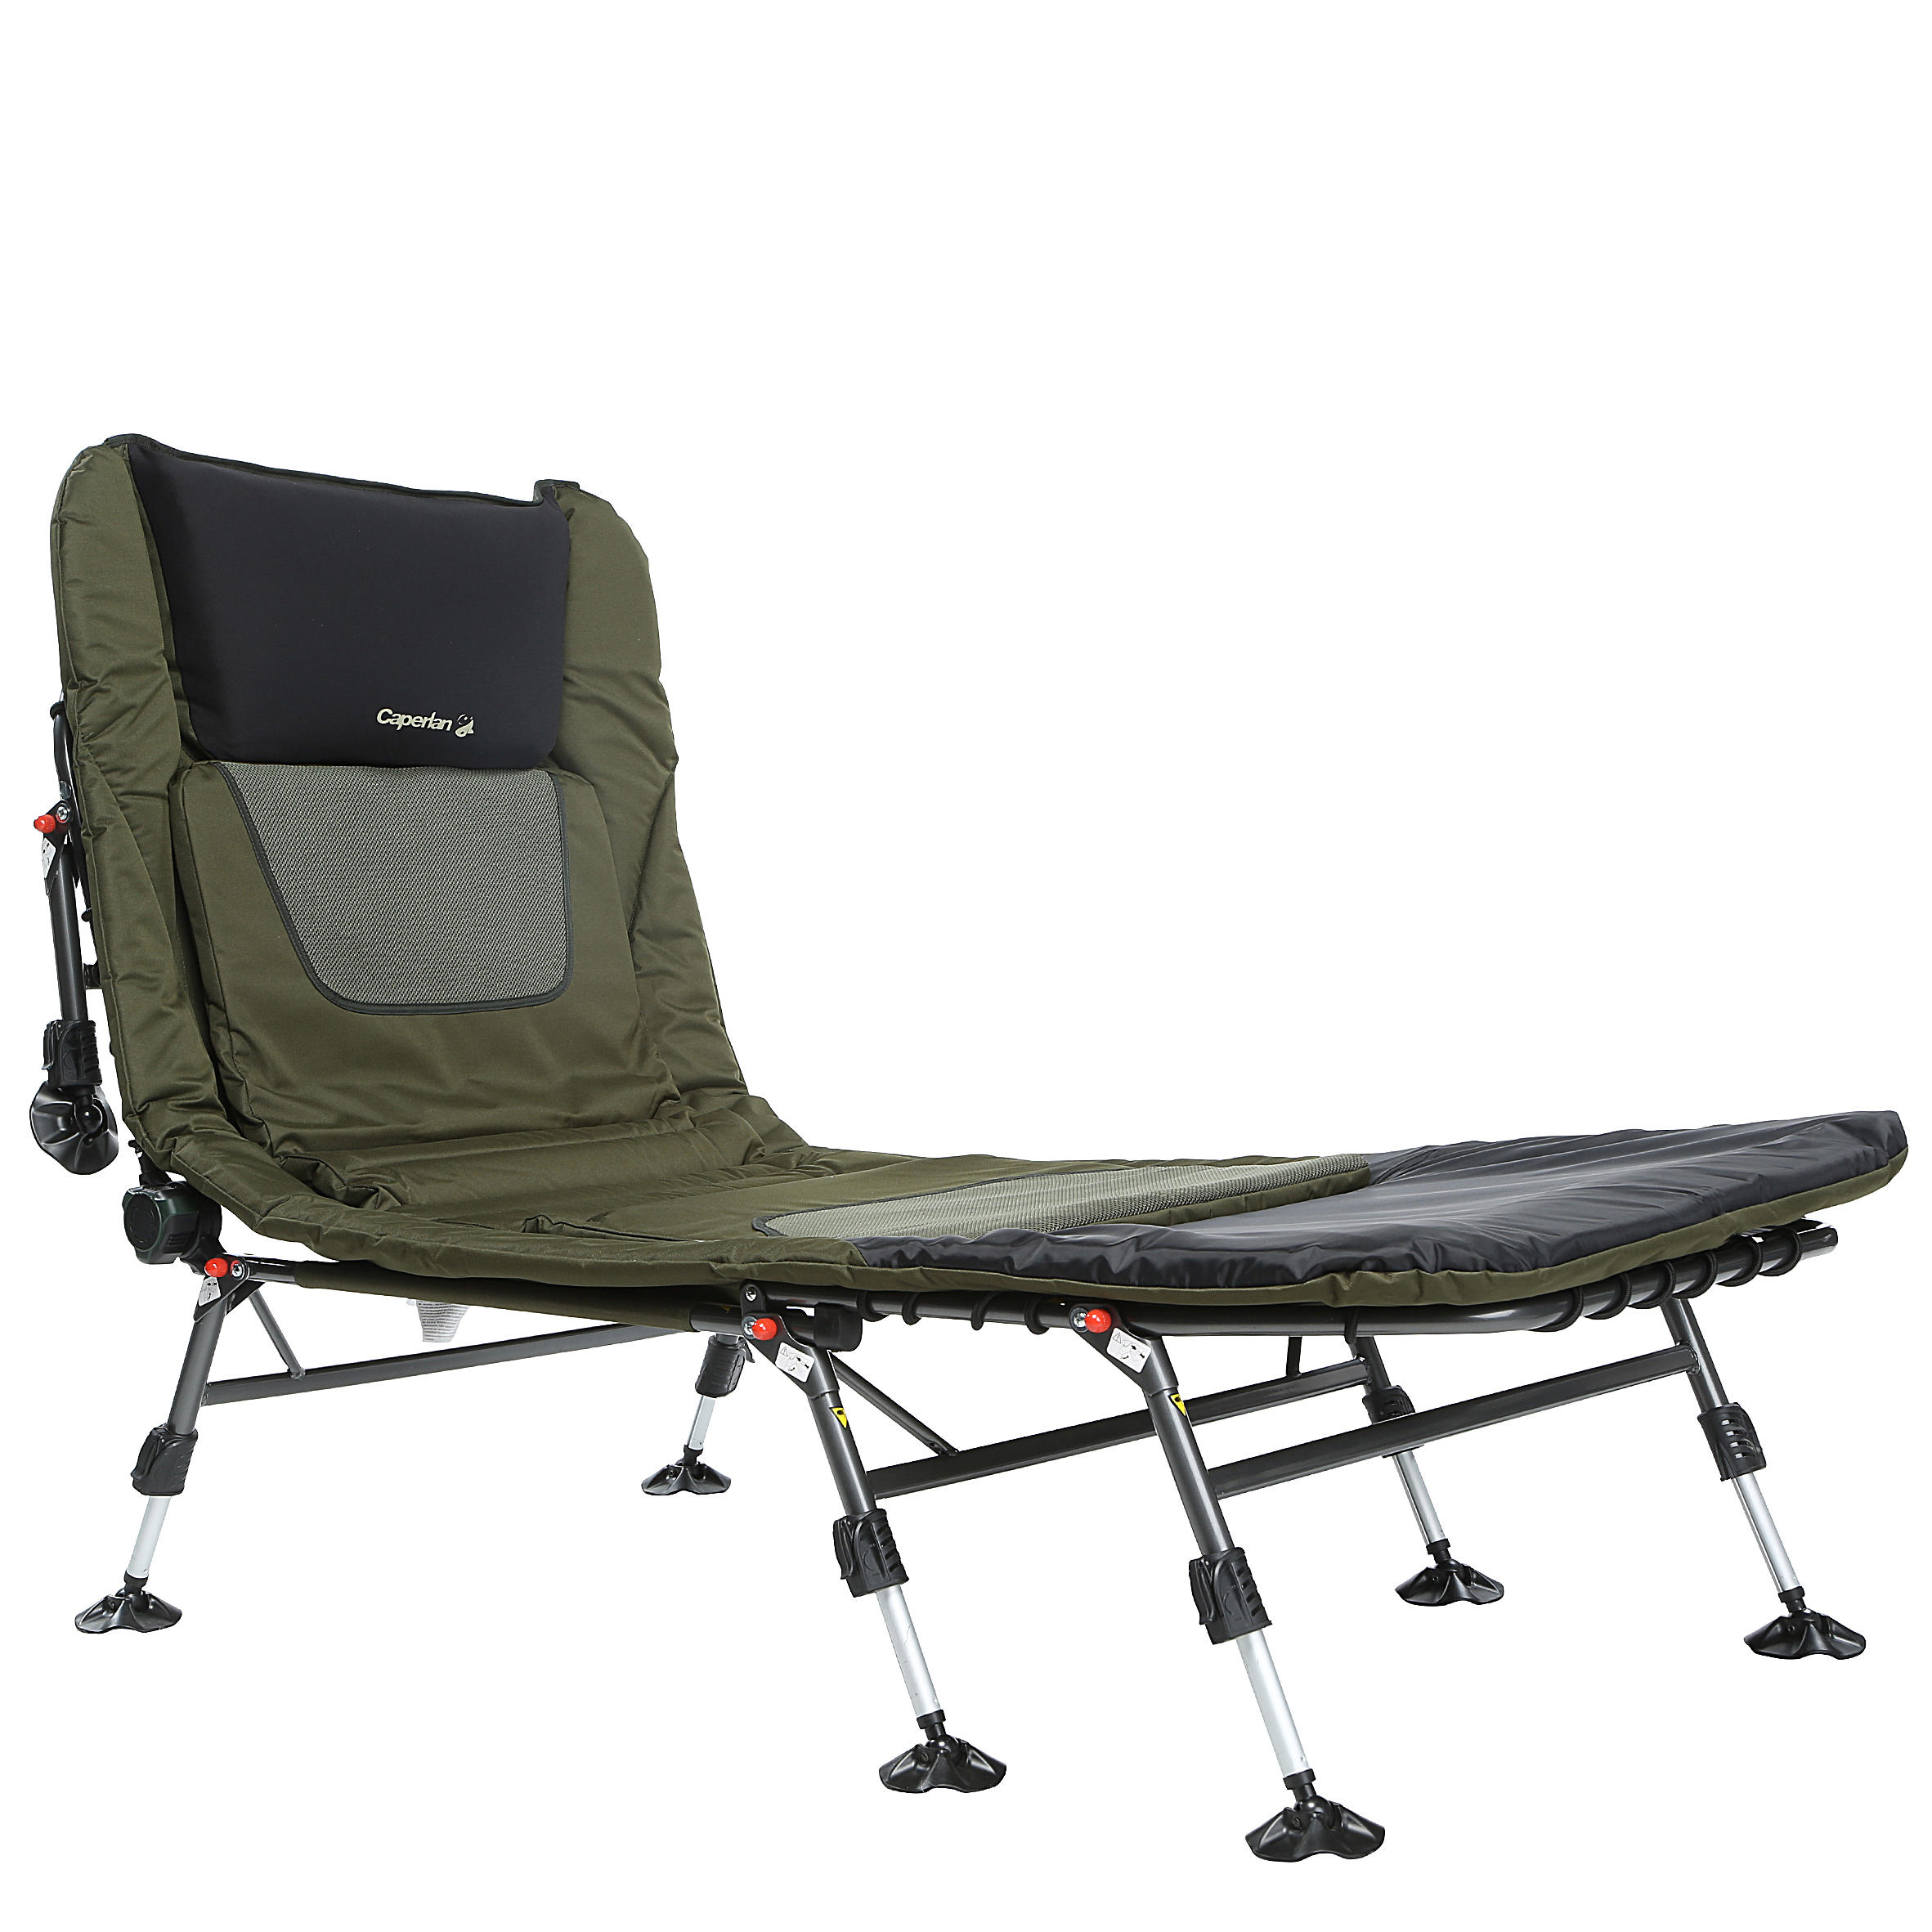 Outdoor Folding Bedchair Chaise Lounge Beach Camping Bed Home Office Nap Bed Sleep Recliner Fishing Portable Folding Camping Cot Beach Chairs Aliexpress